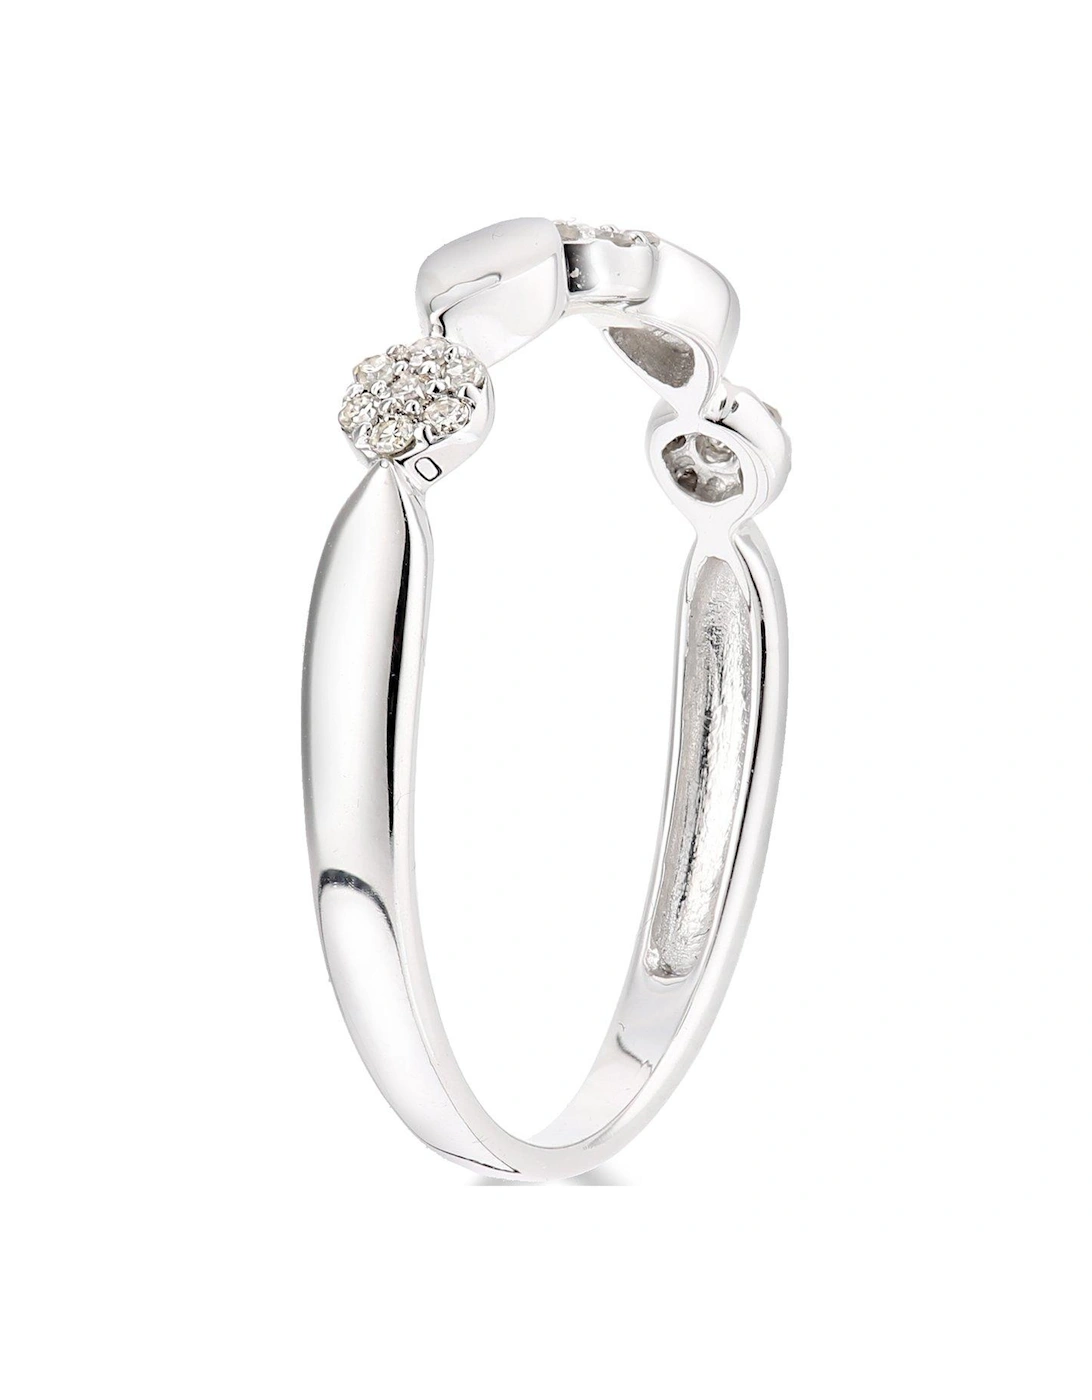 9ct White Gold 10 Point Diamond Commitment Ring